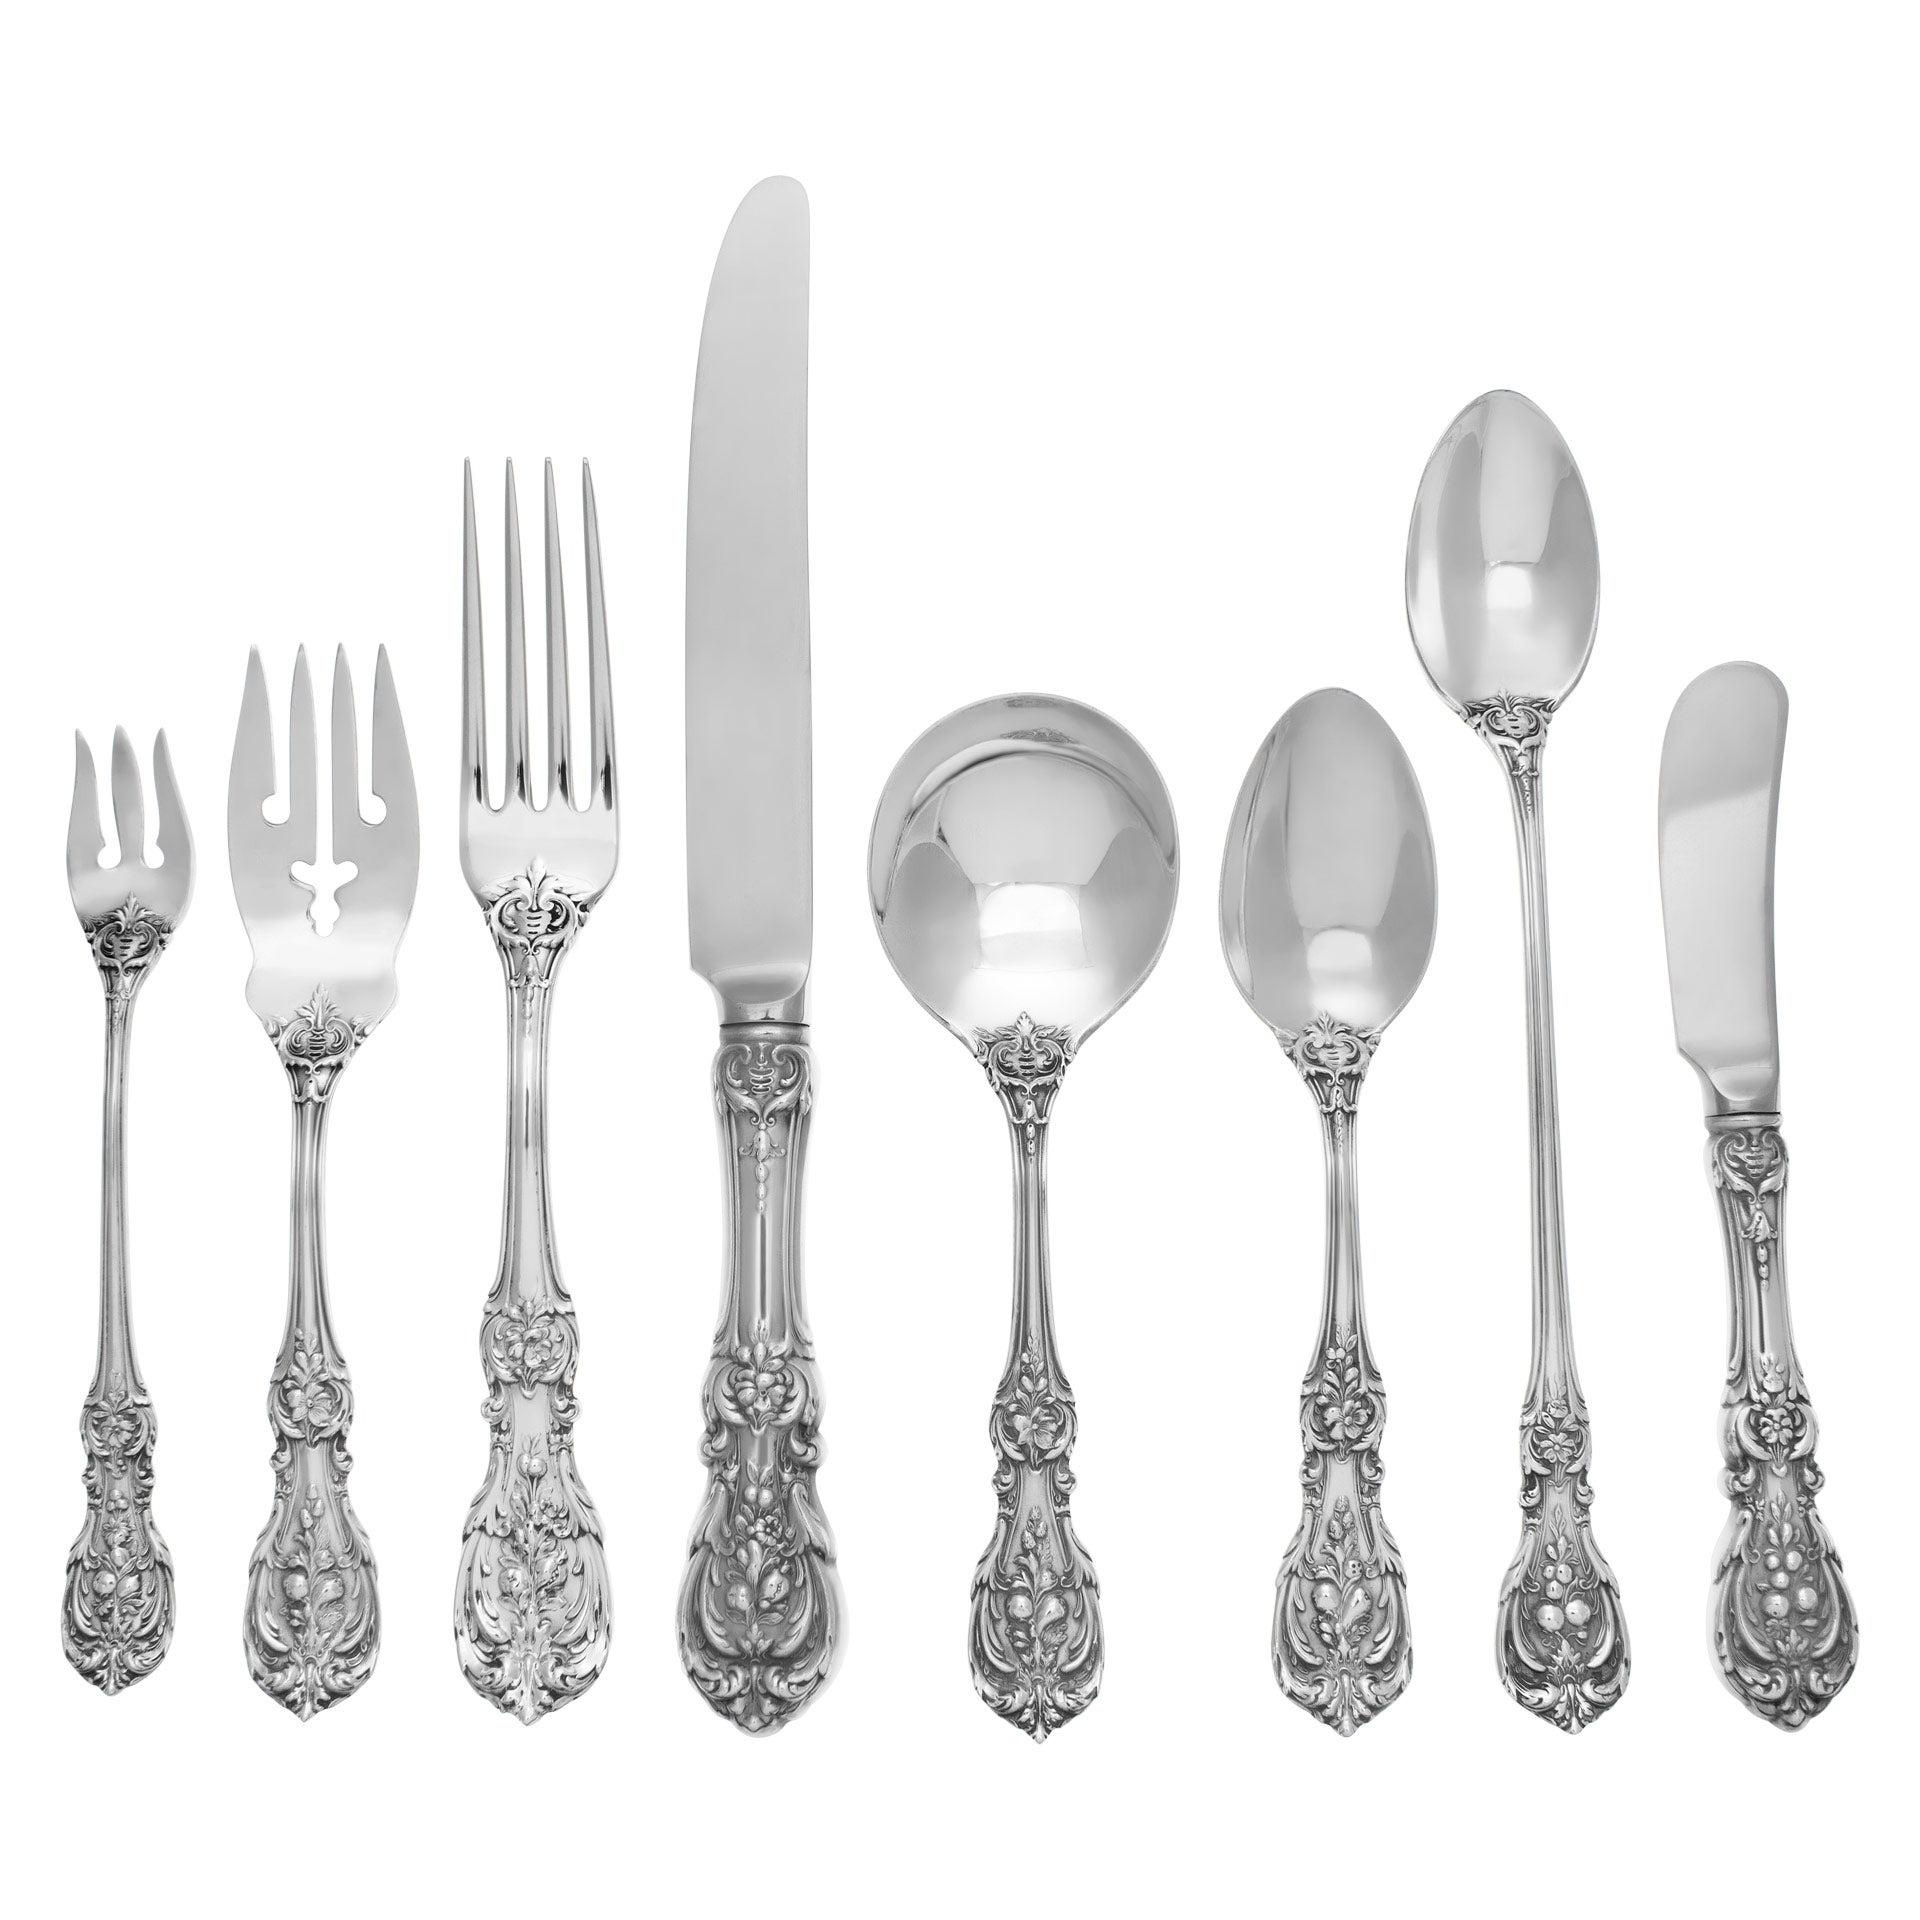 Reed & Barton "Francis the First" Sterling Silver Flatware Set